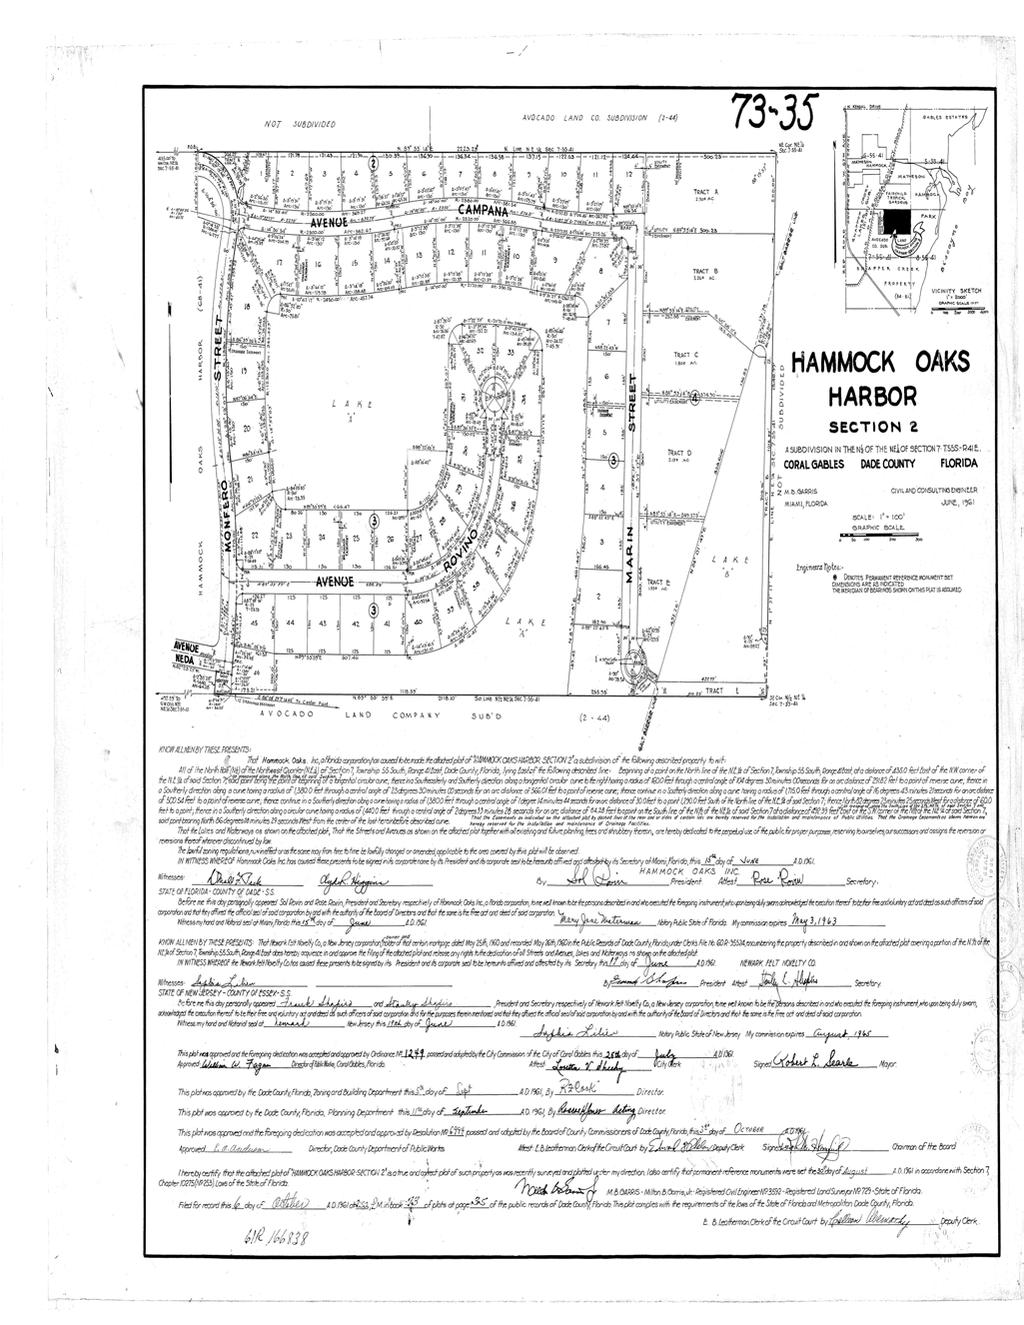 Miami-Dade Official Records - Print Document https://www2.